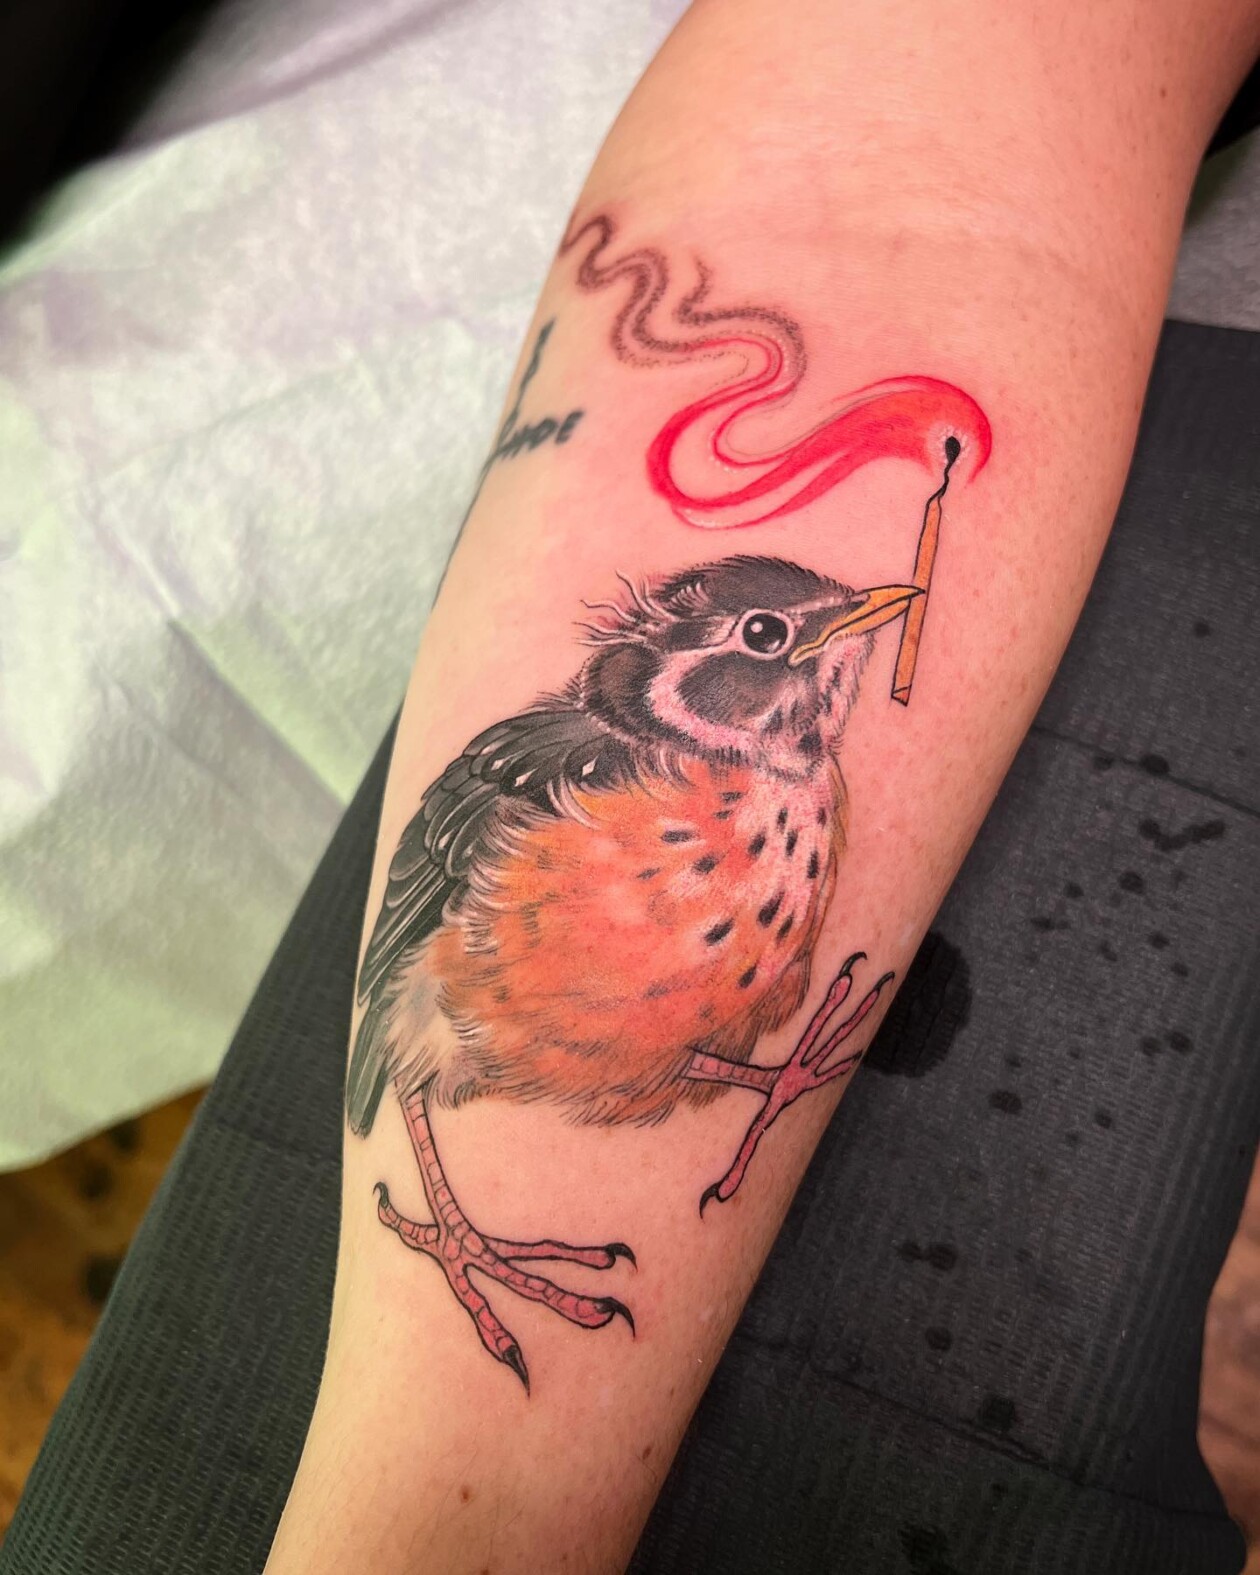 Stephanie Brown Creates Whimsical Tattoos Of Birds Holding A Lit Match Symbolizing Hope For A Better Future (8)